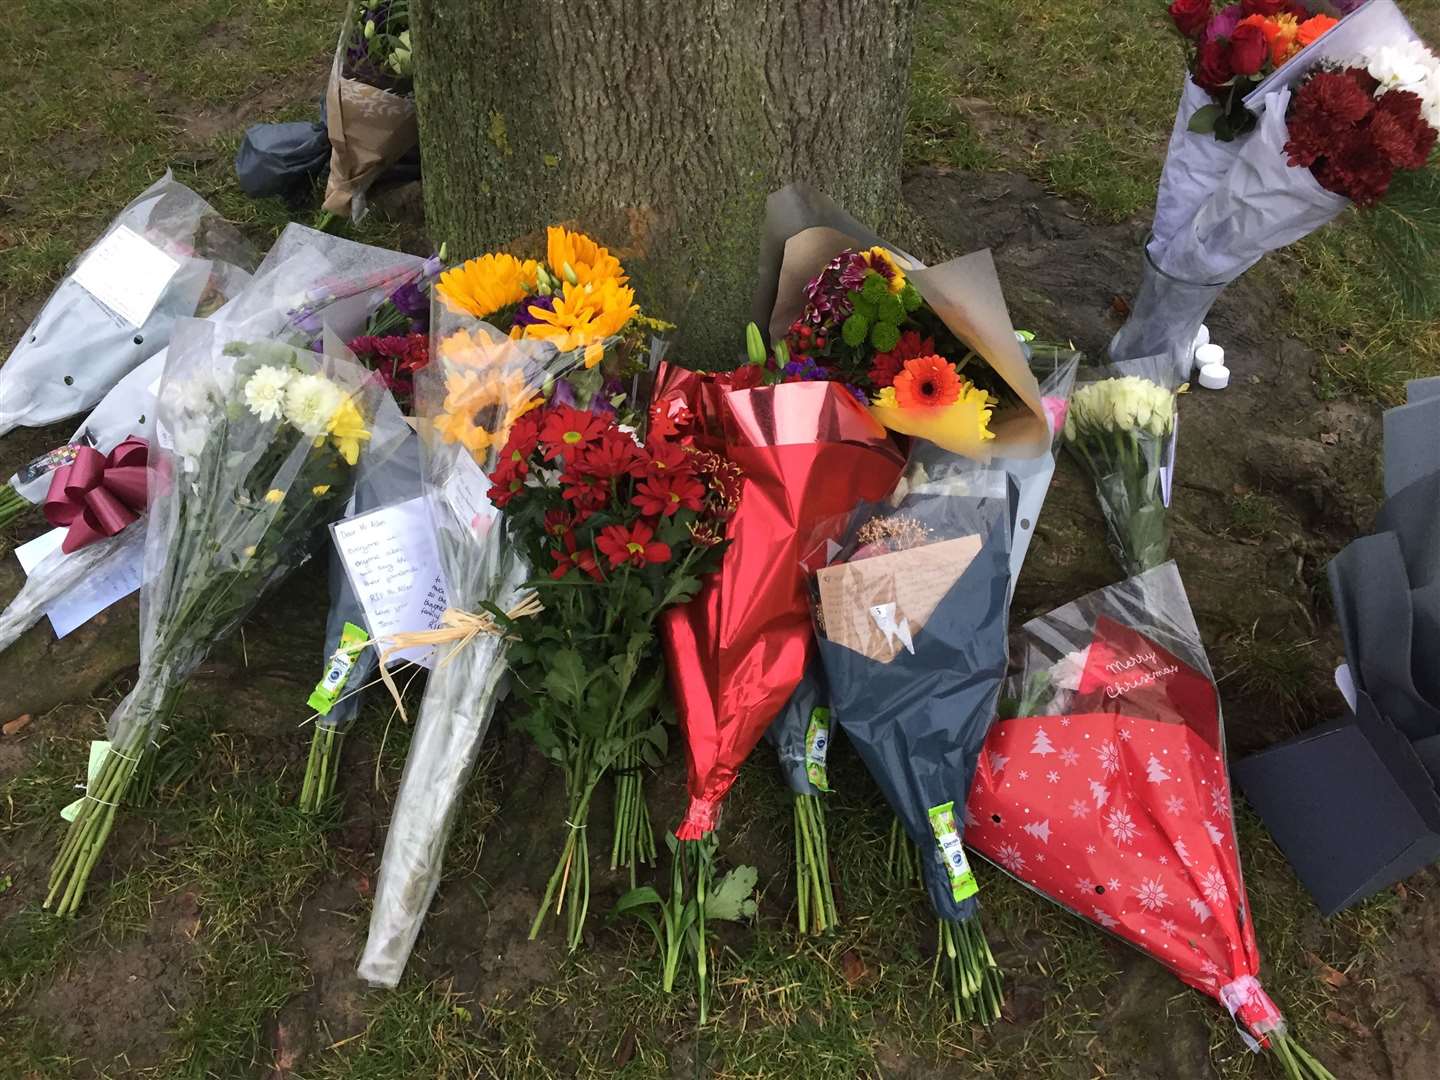 Tributes flooded in after Ben Allen died in a suspected hit-and-run